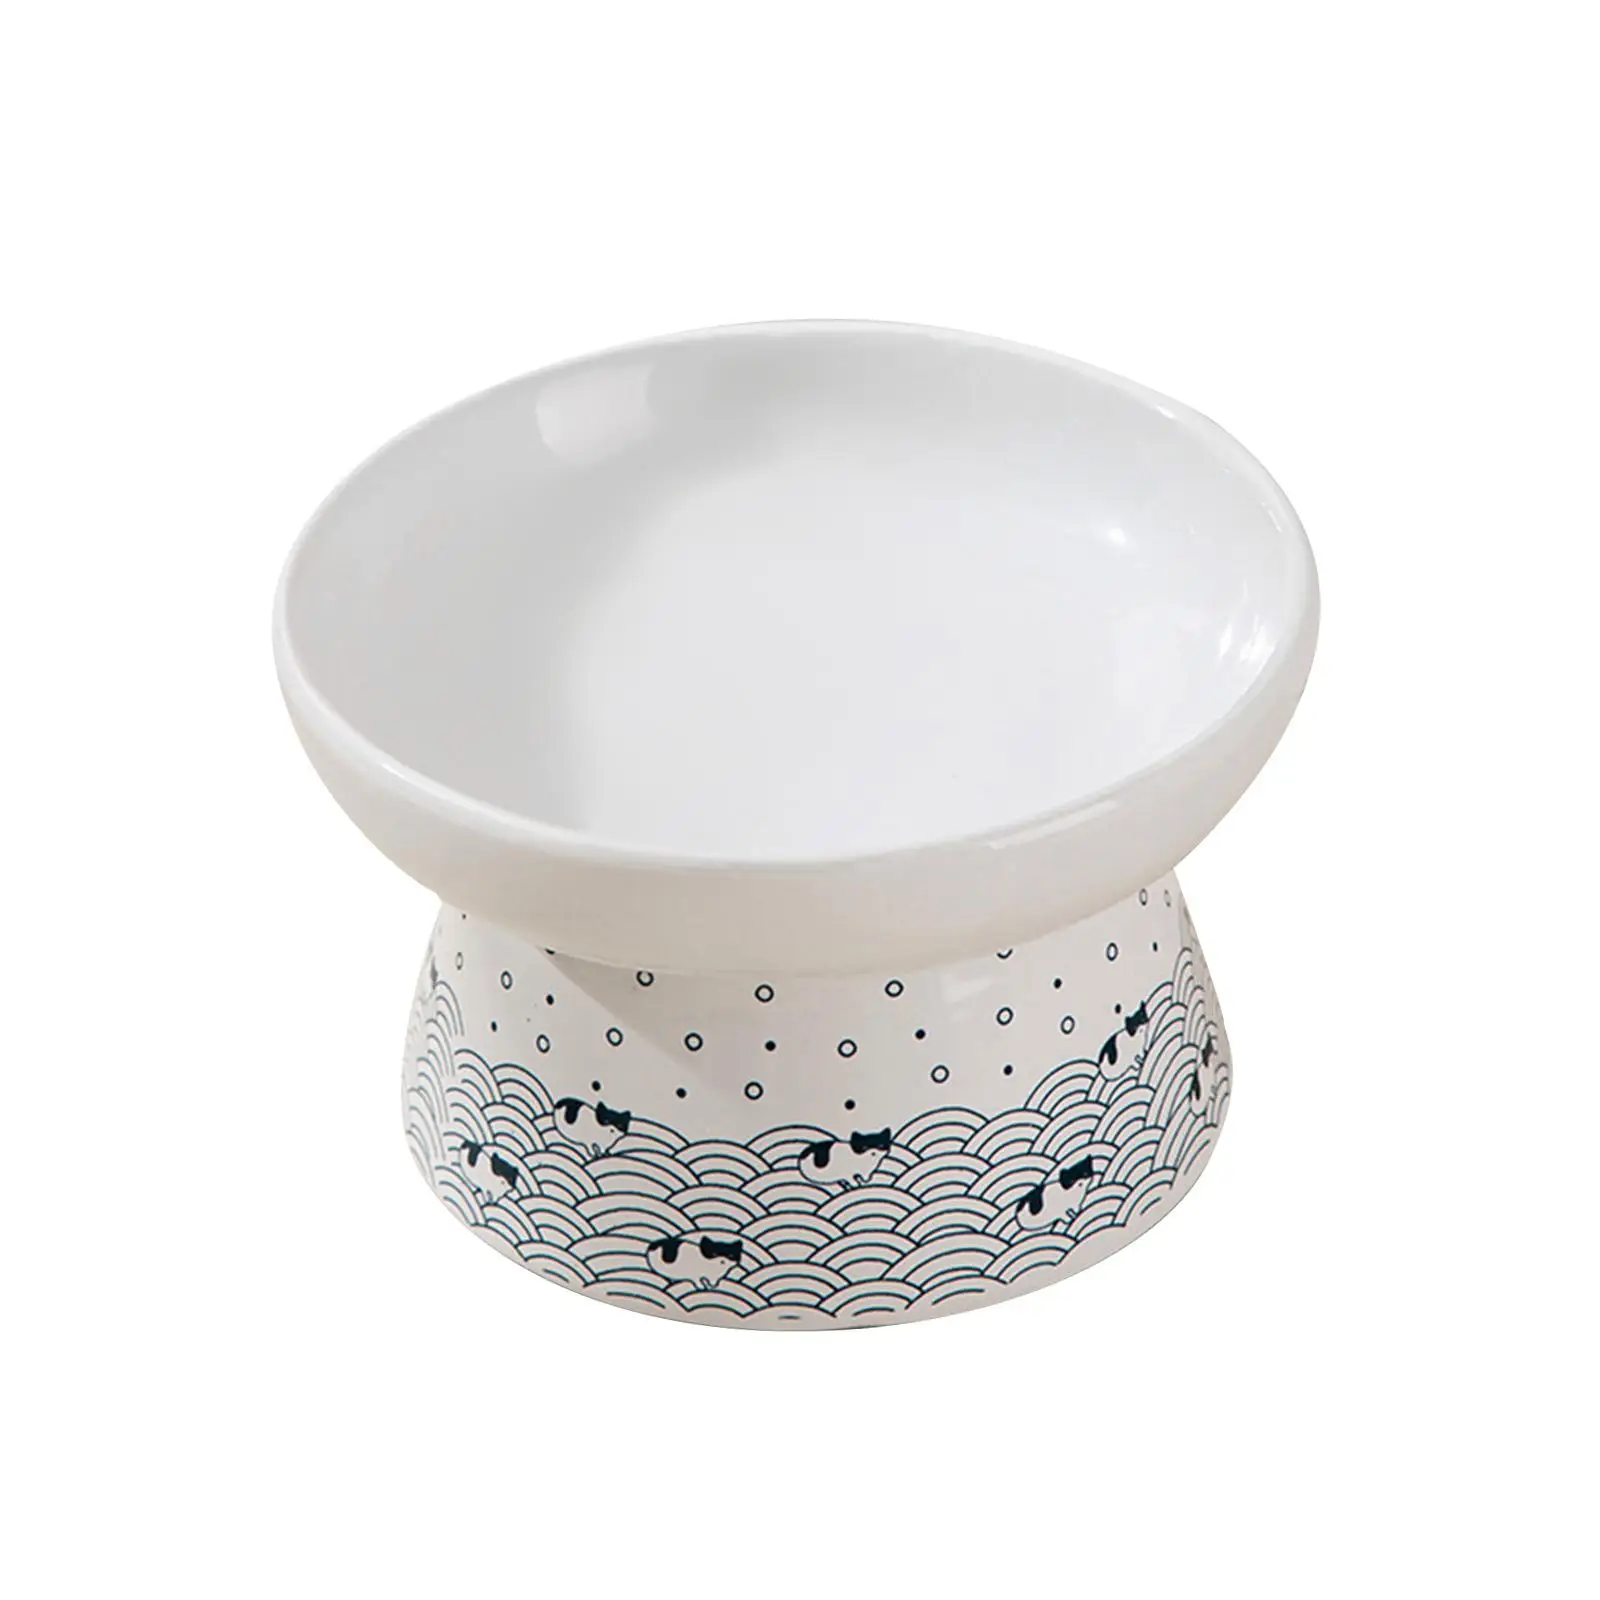 Ceramic Raised Cat Food Bowl dish Stable Base Smooth Surface Cat Feeding Watering Supplies Sturdy Easily Wash Porcelain Bowl